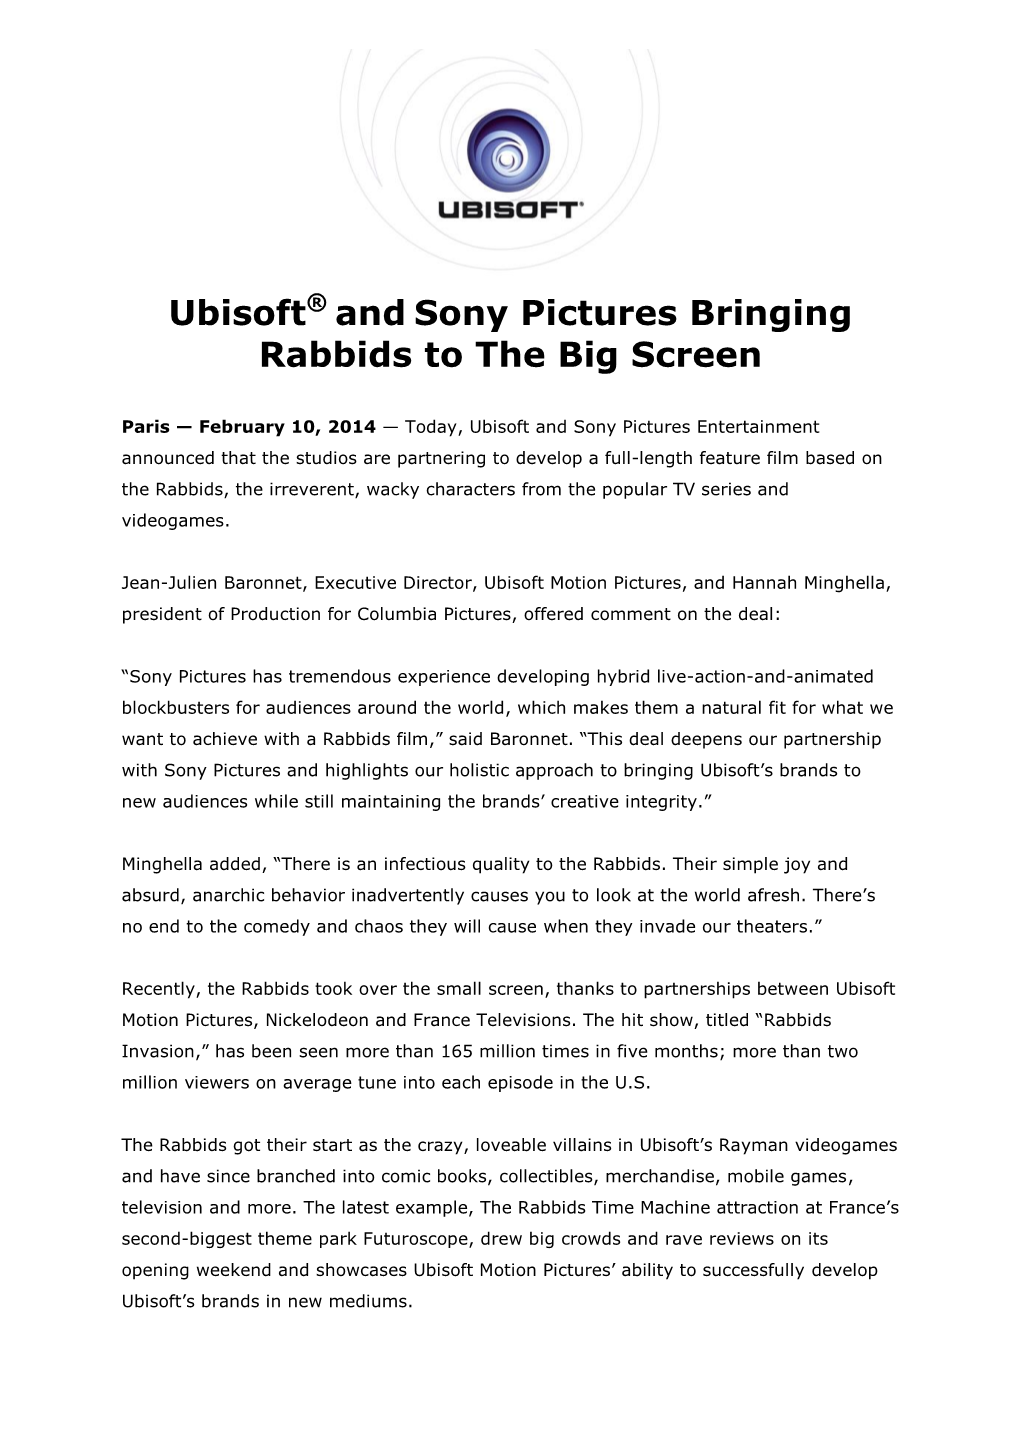 Ubisoft® and Sony Pictures Bringing Rabbids to the Big Screen